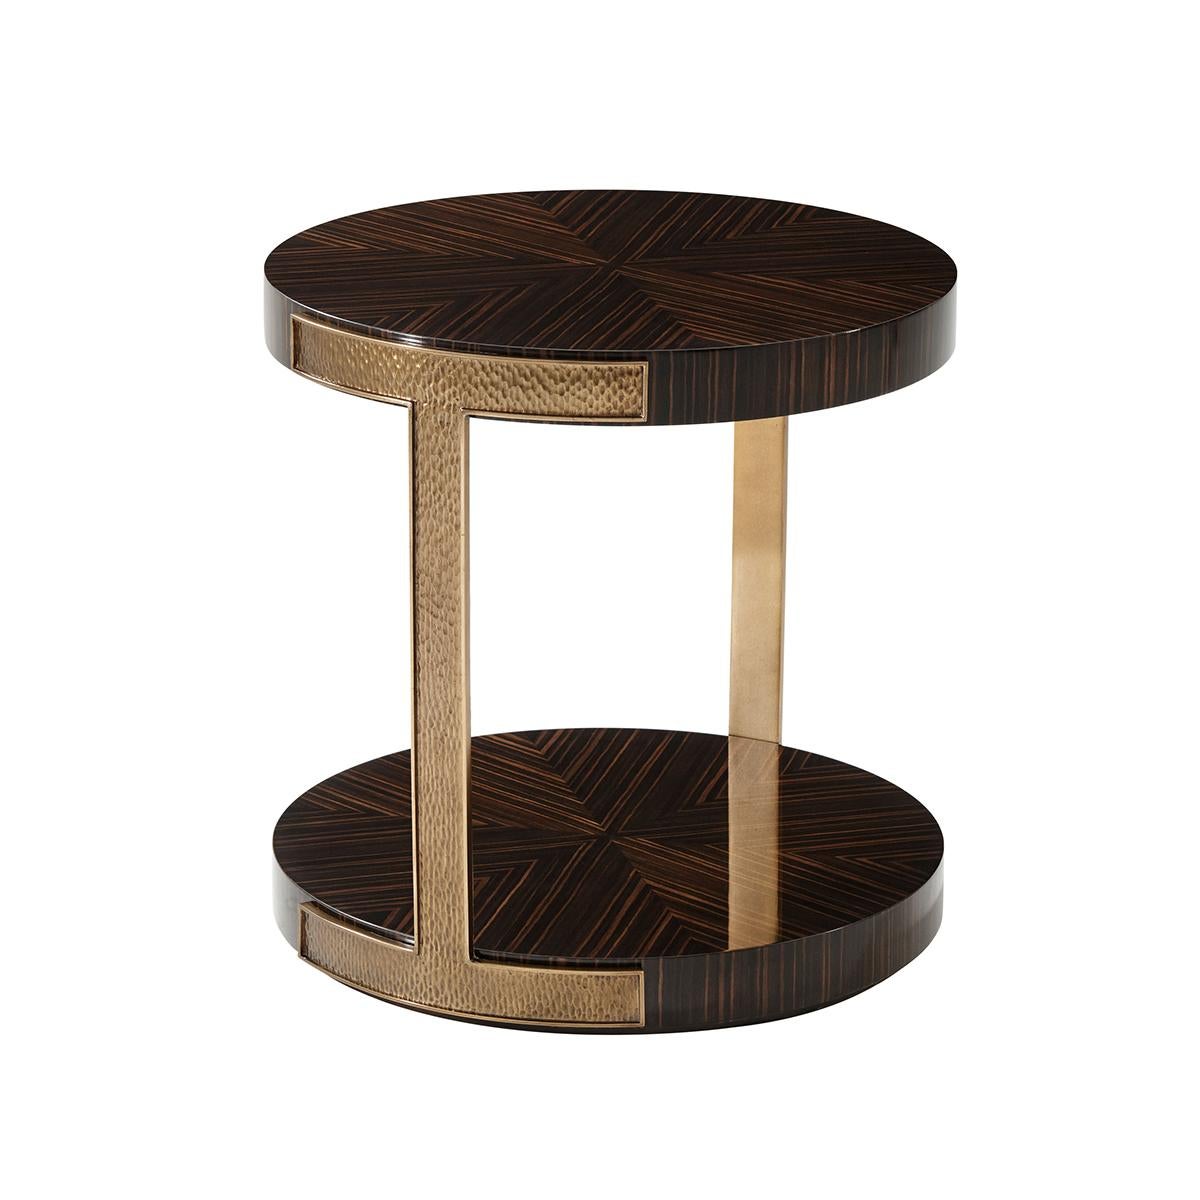 With a circular top in simulated ebony veneer with a fine amara finish with a unique hand-hammered brass finish metal accents.

Dimensions: 24